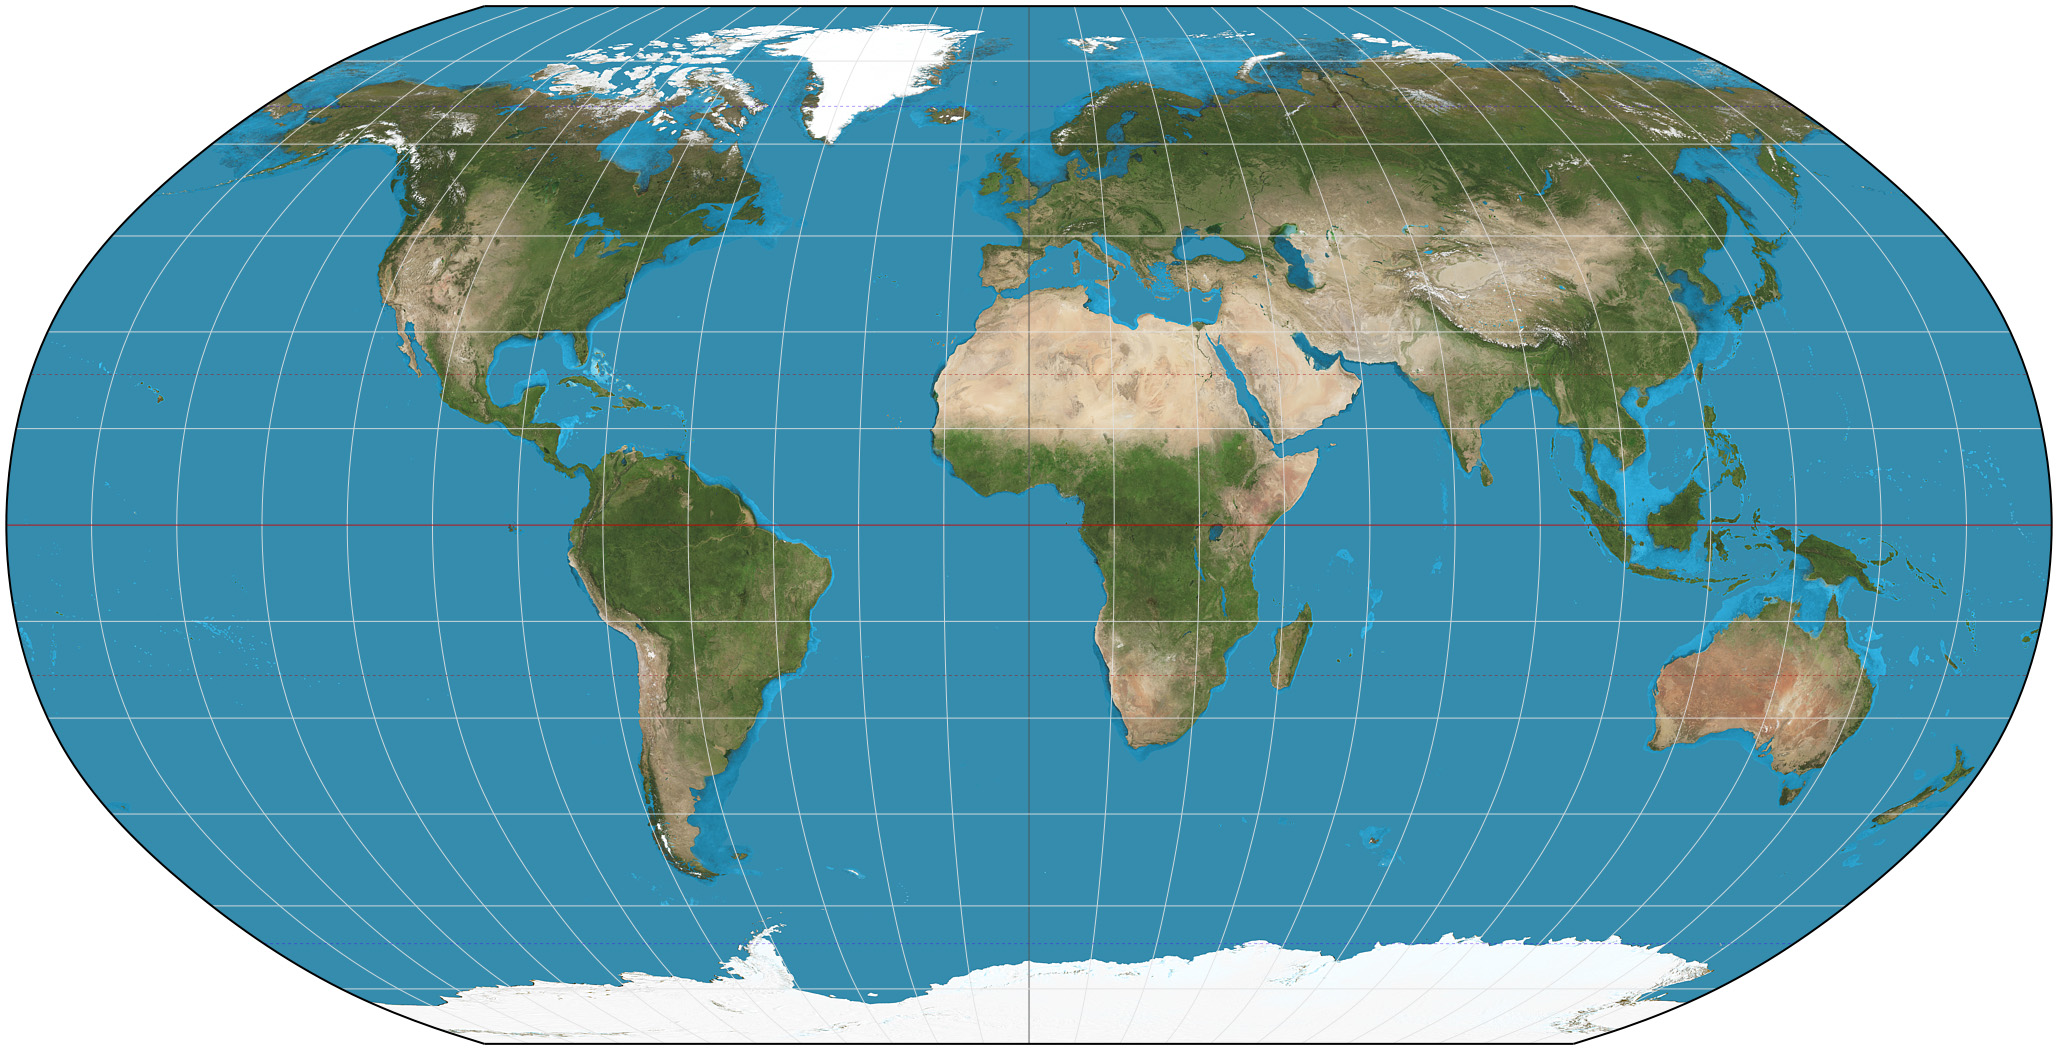 <p>A map projection showing the poles as lines rather than points and more accurately portraying high latitude lands and water to land ratio</p>